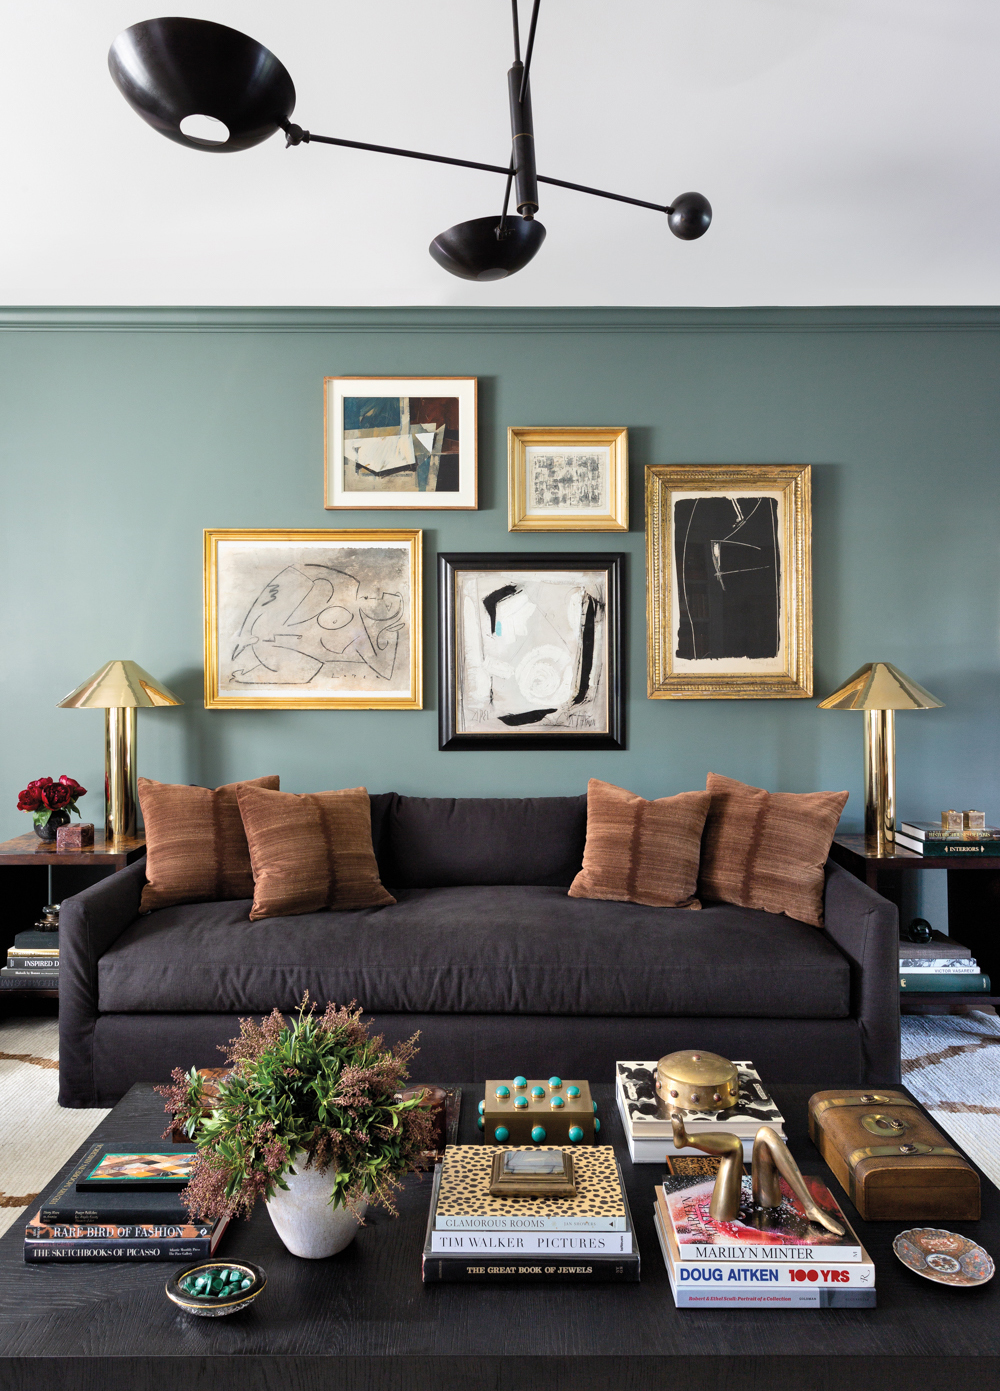 What Color Throw Pillows for Tan Couch: Top Chic Picks